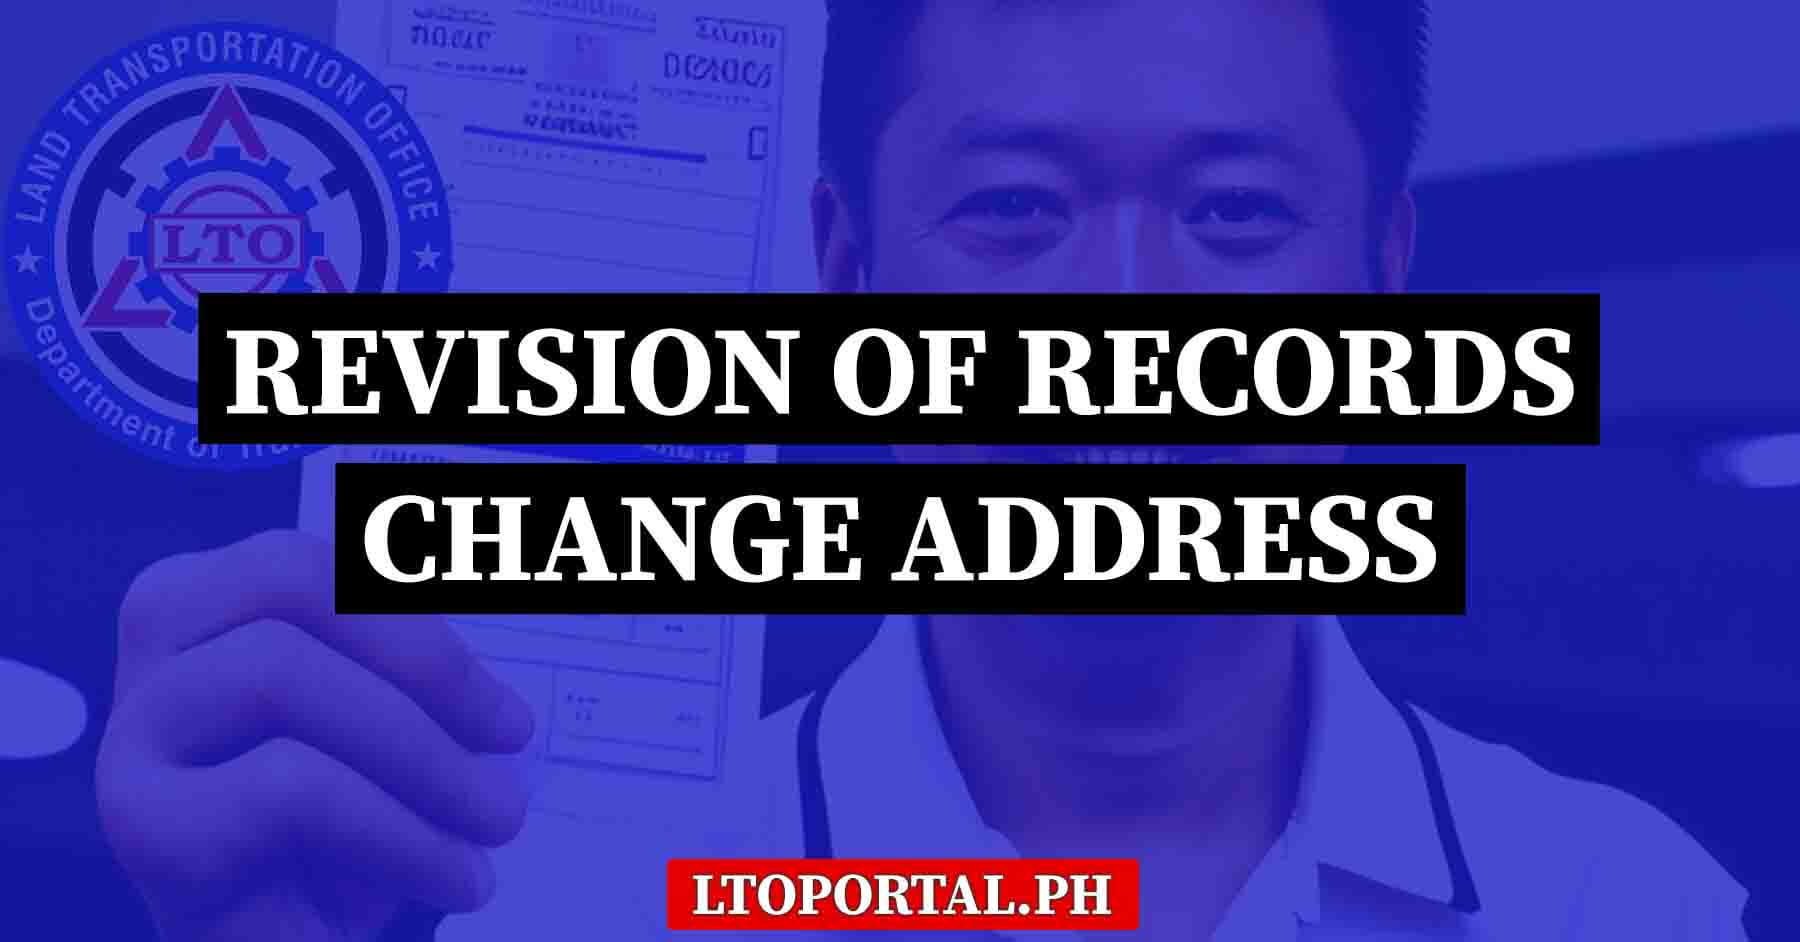 change date on driver's license